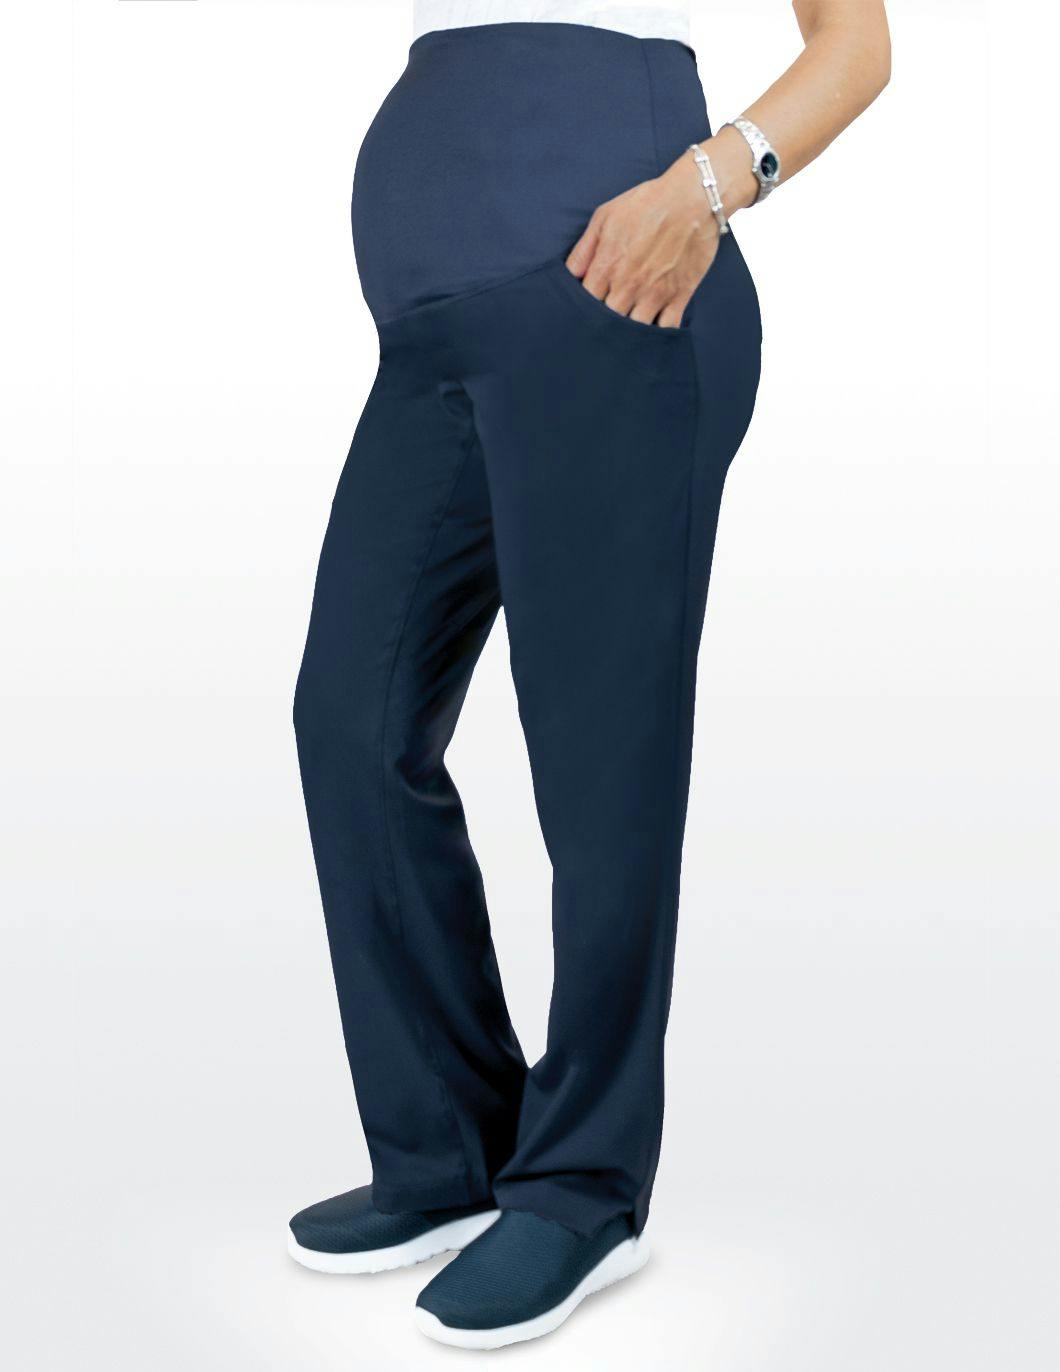 healing-hands-hh-works-womens-maternity-scrub-pant-navy